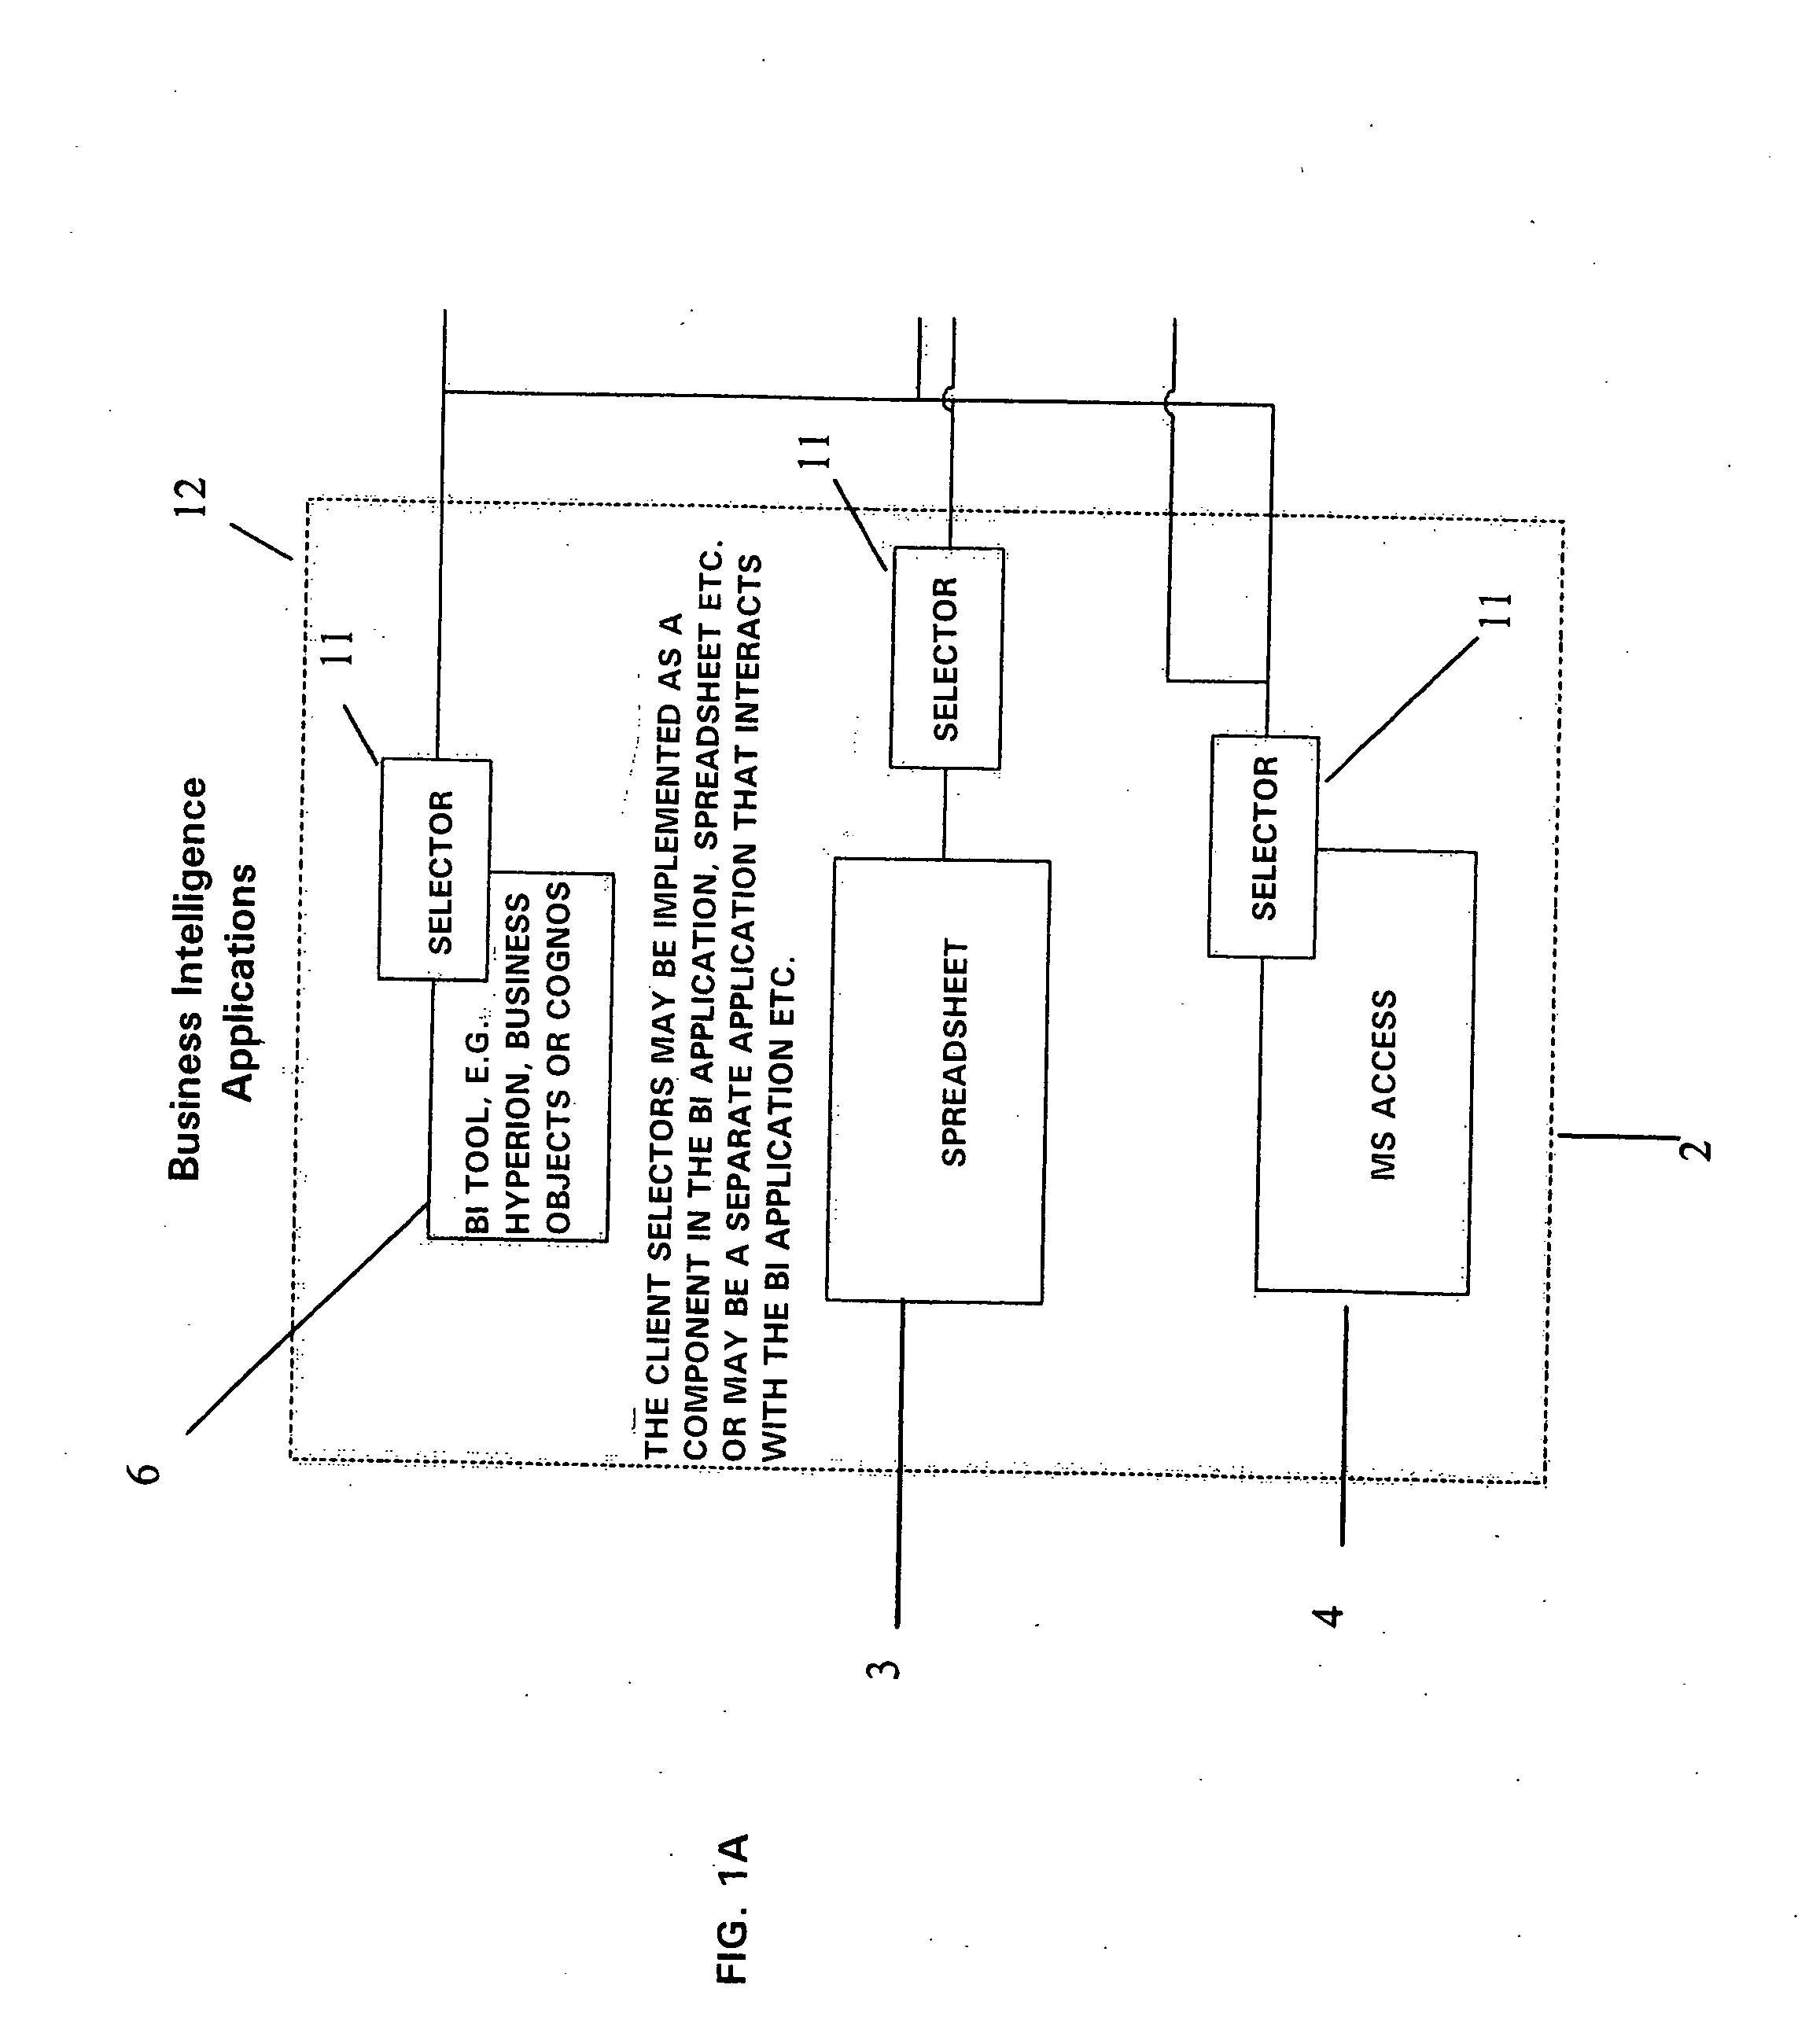 System and method for representation of business information